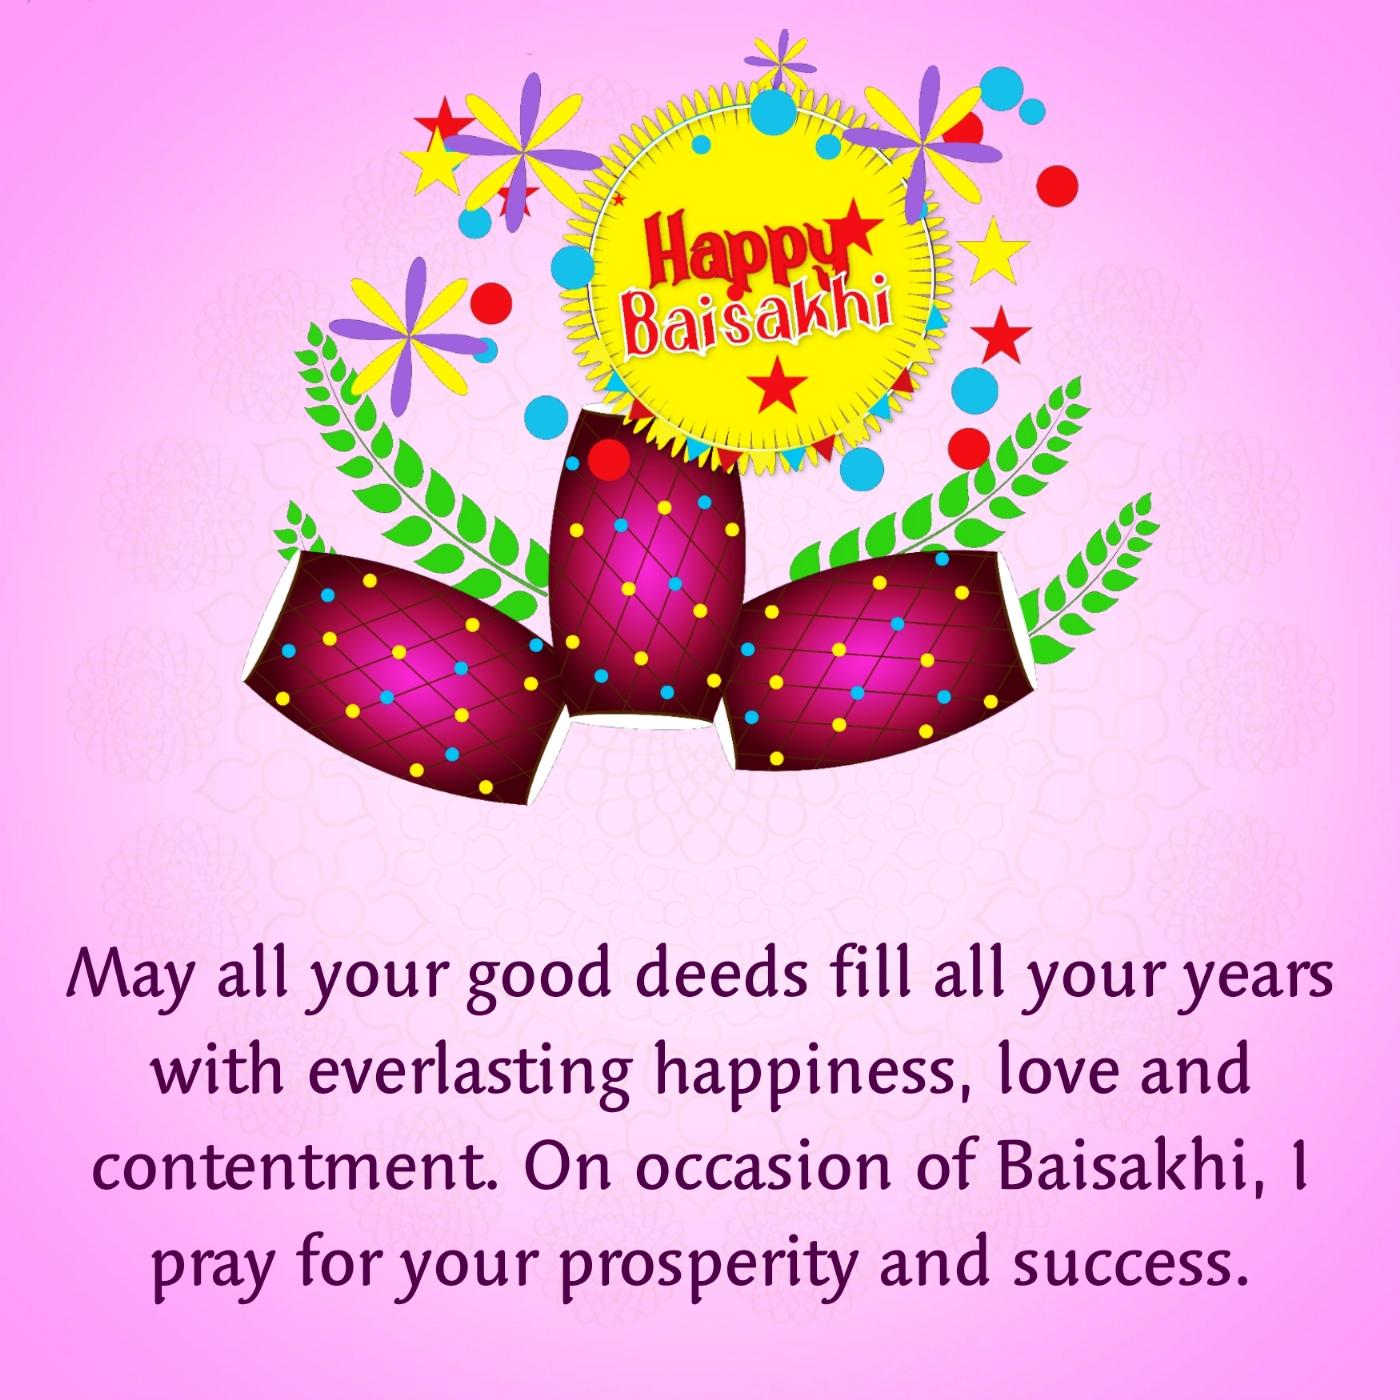 May all your good deeds fill all your years with everlasting happiness